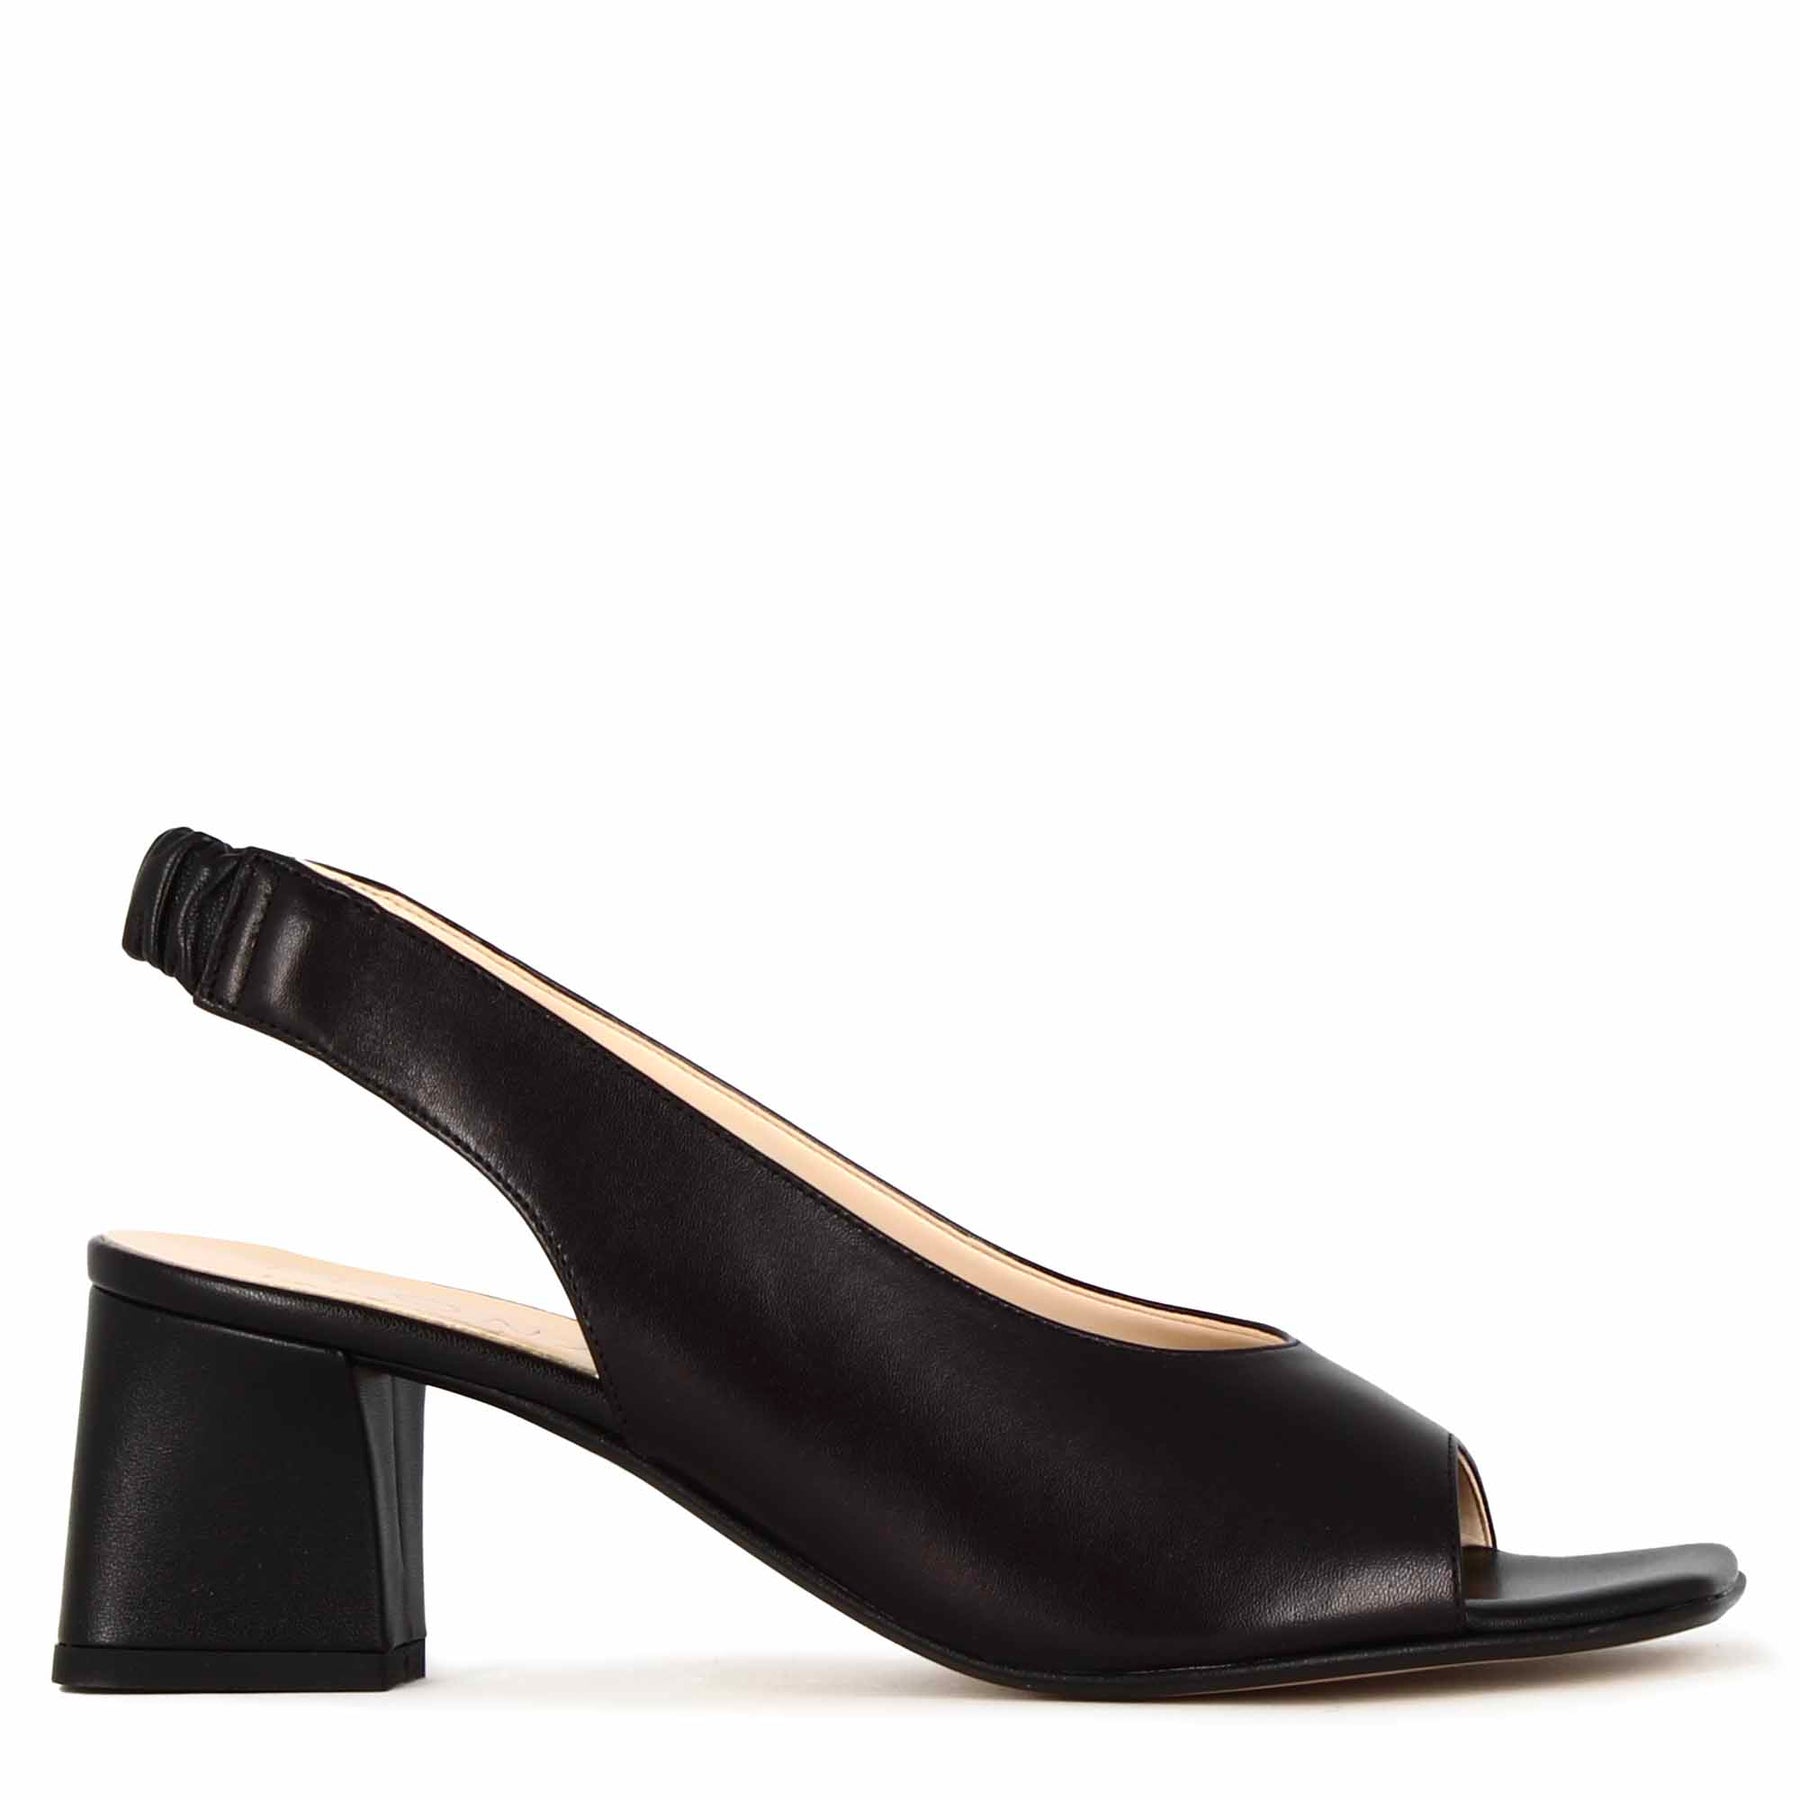 Women's slingback sandal in black leather with square toe